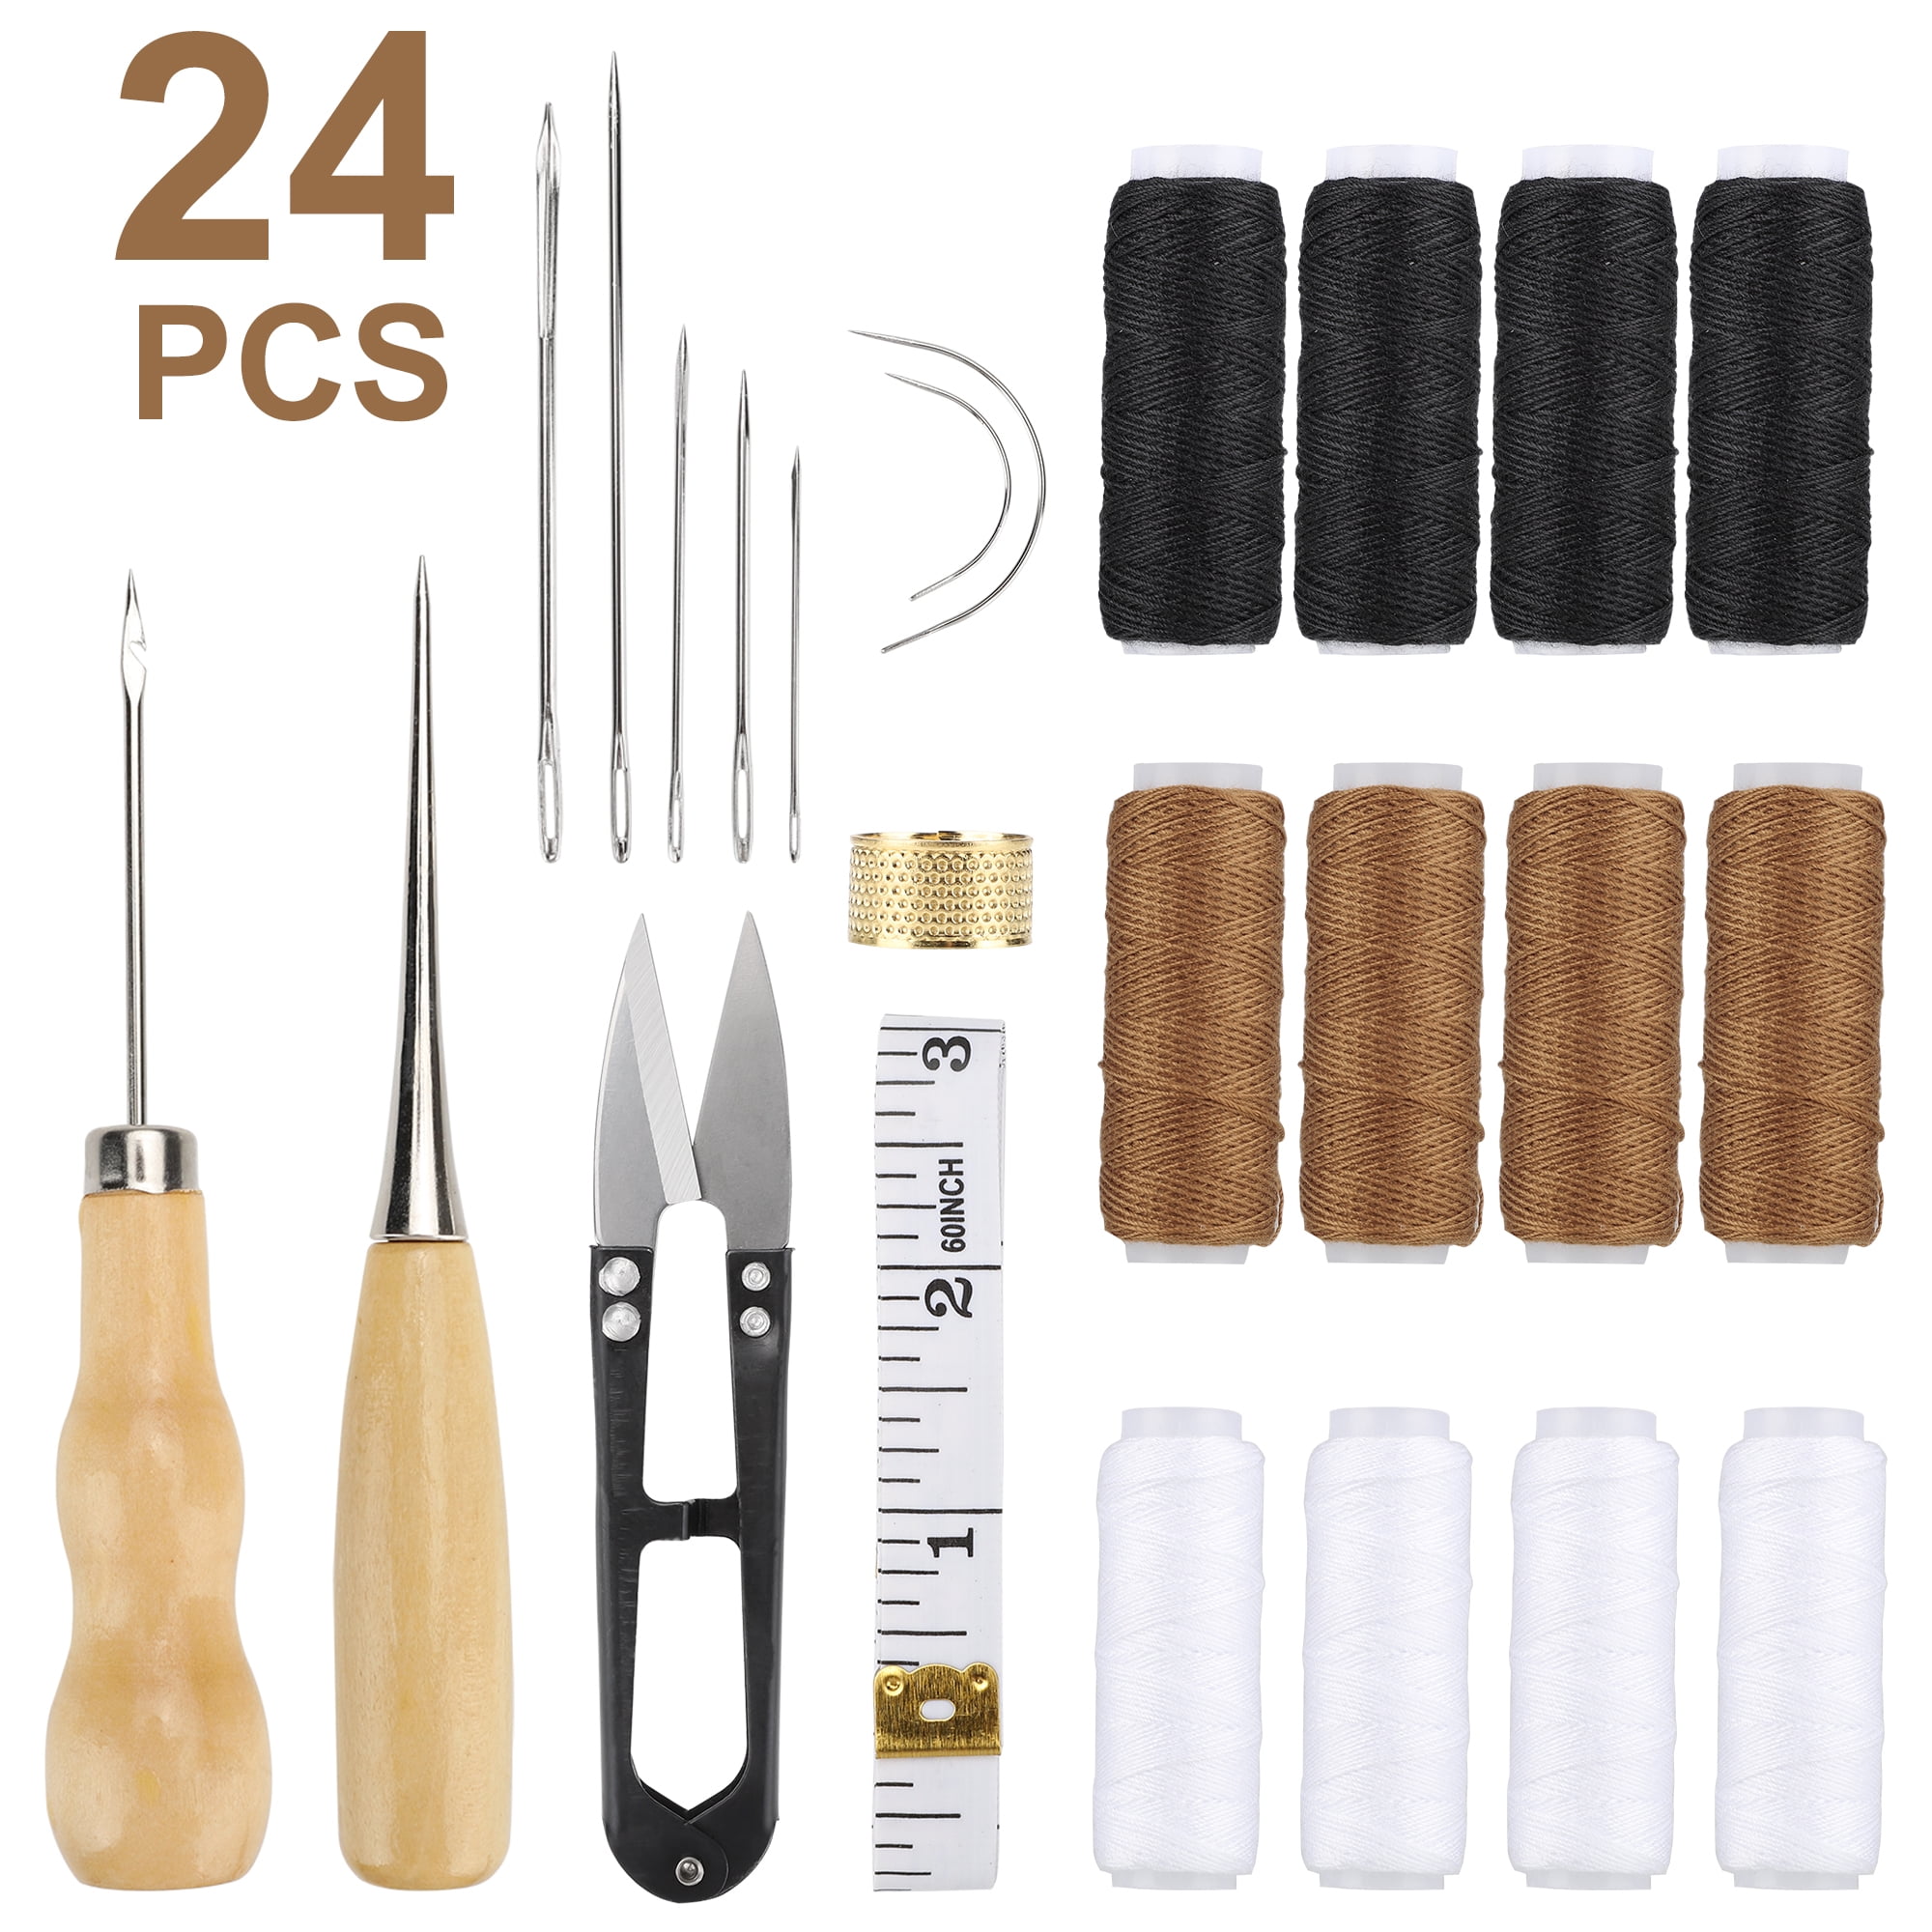 29pcs Leather Craft Tool Kit, TSV Upholstery Repair Kit for Sewing, Stitching, Measuring, Size: Small